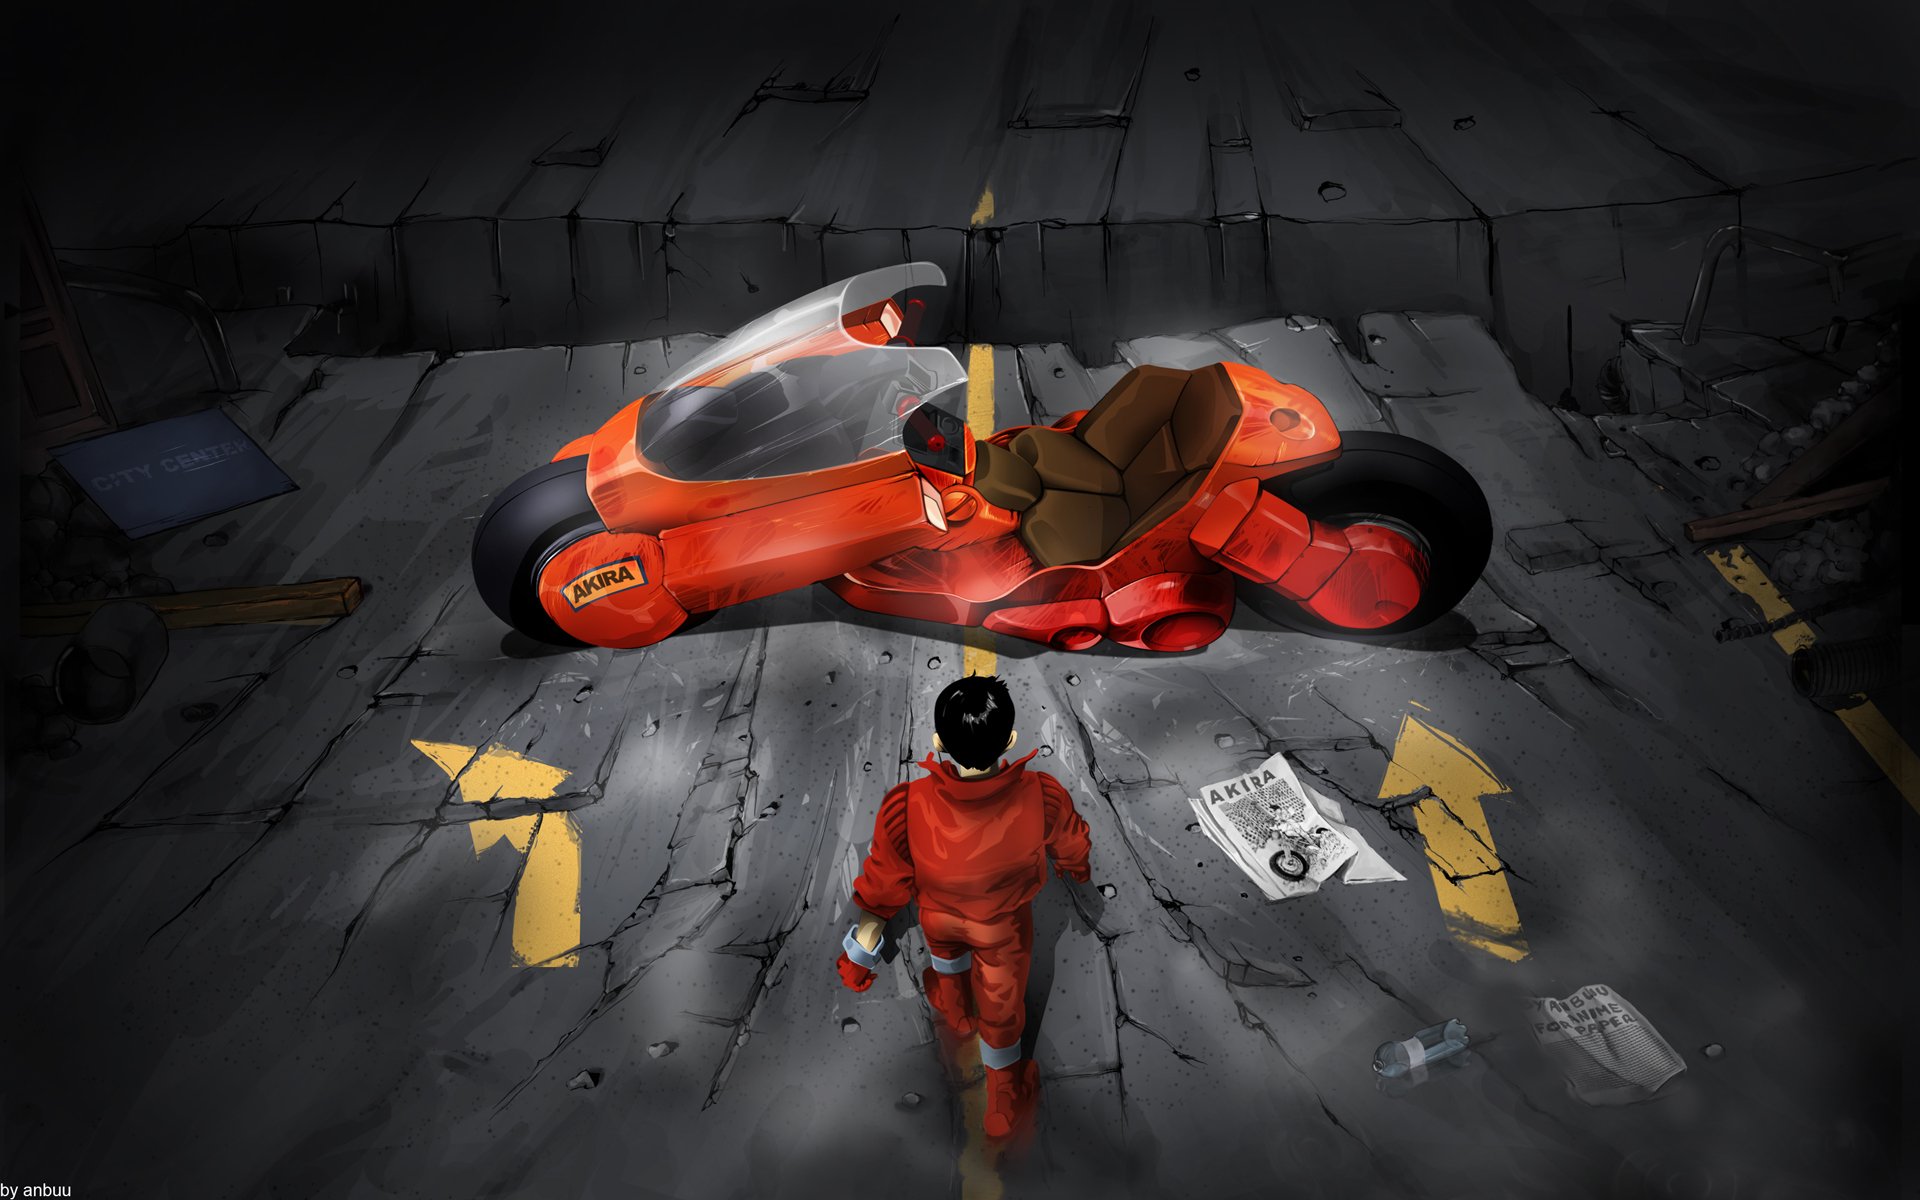 Akira 4K wallpapers for your desktop or mobile screen free and easy to